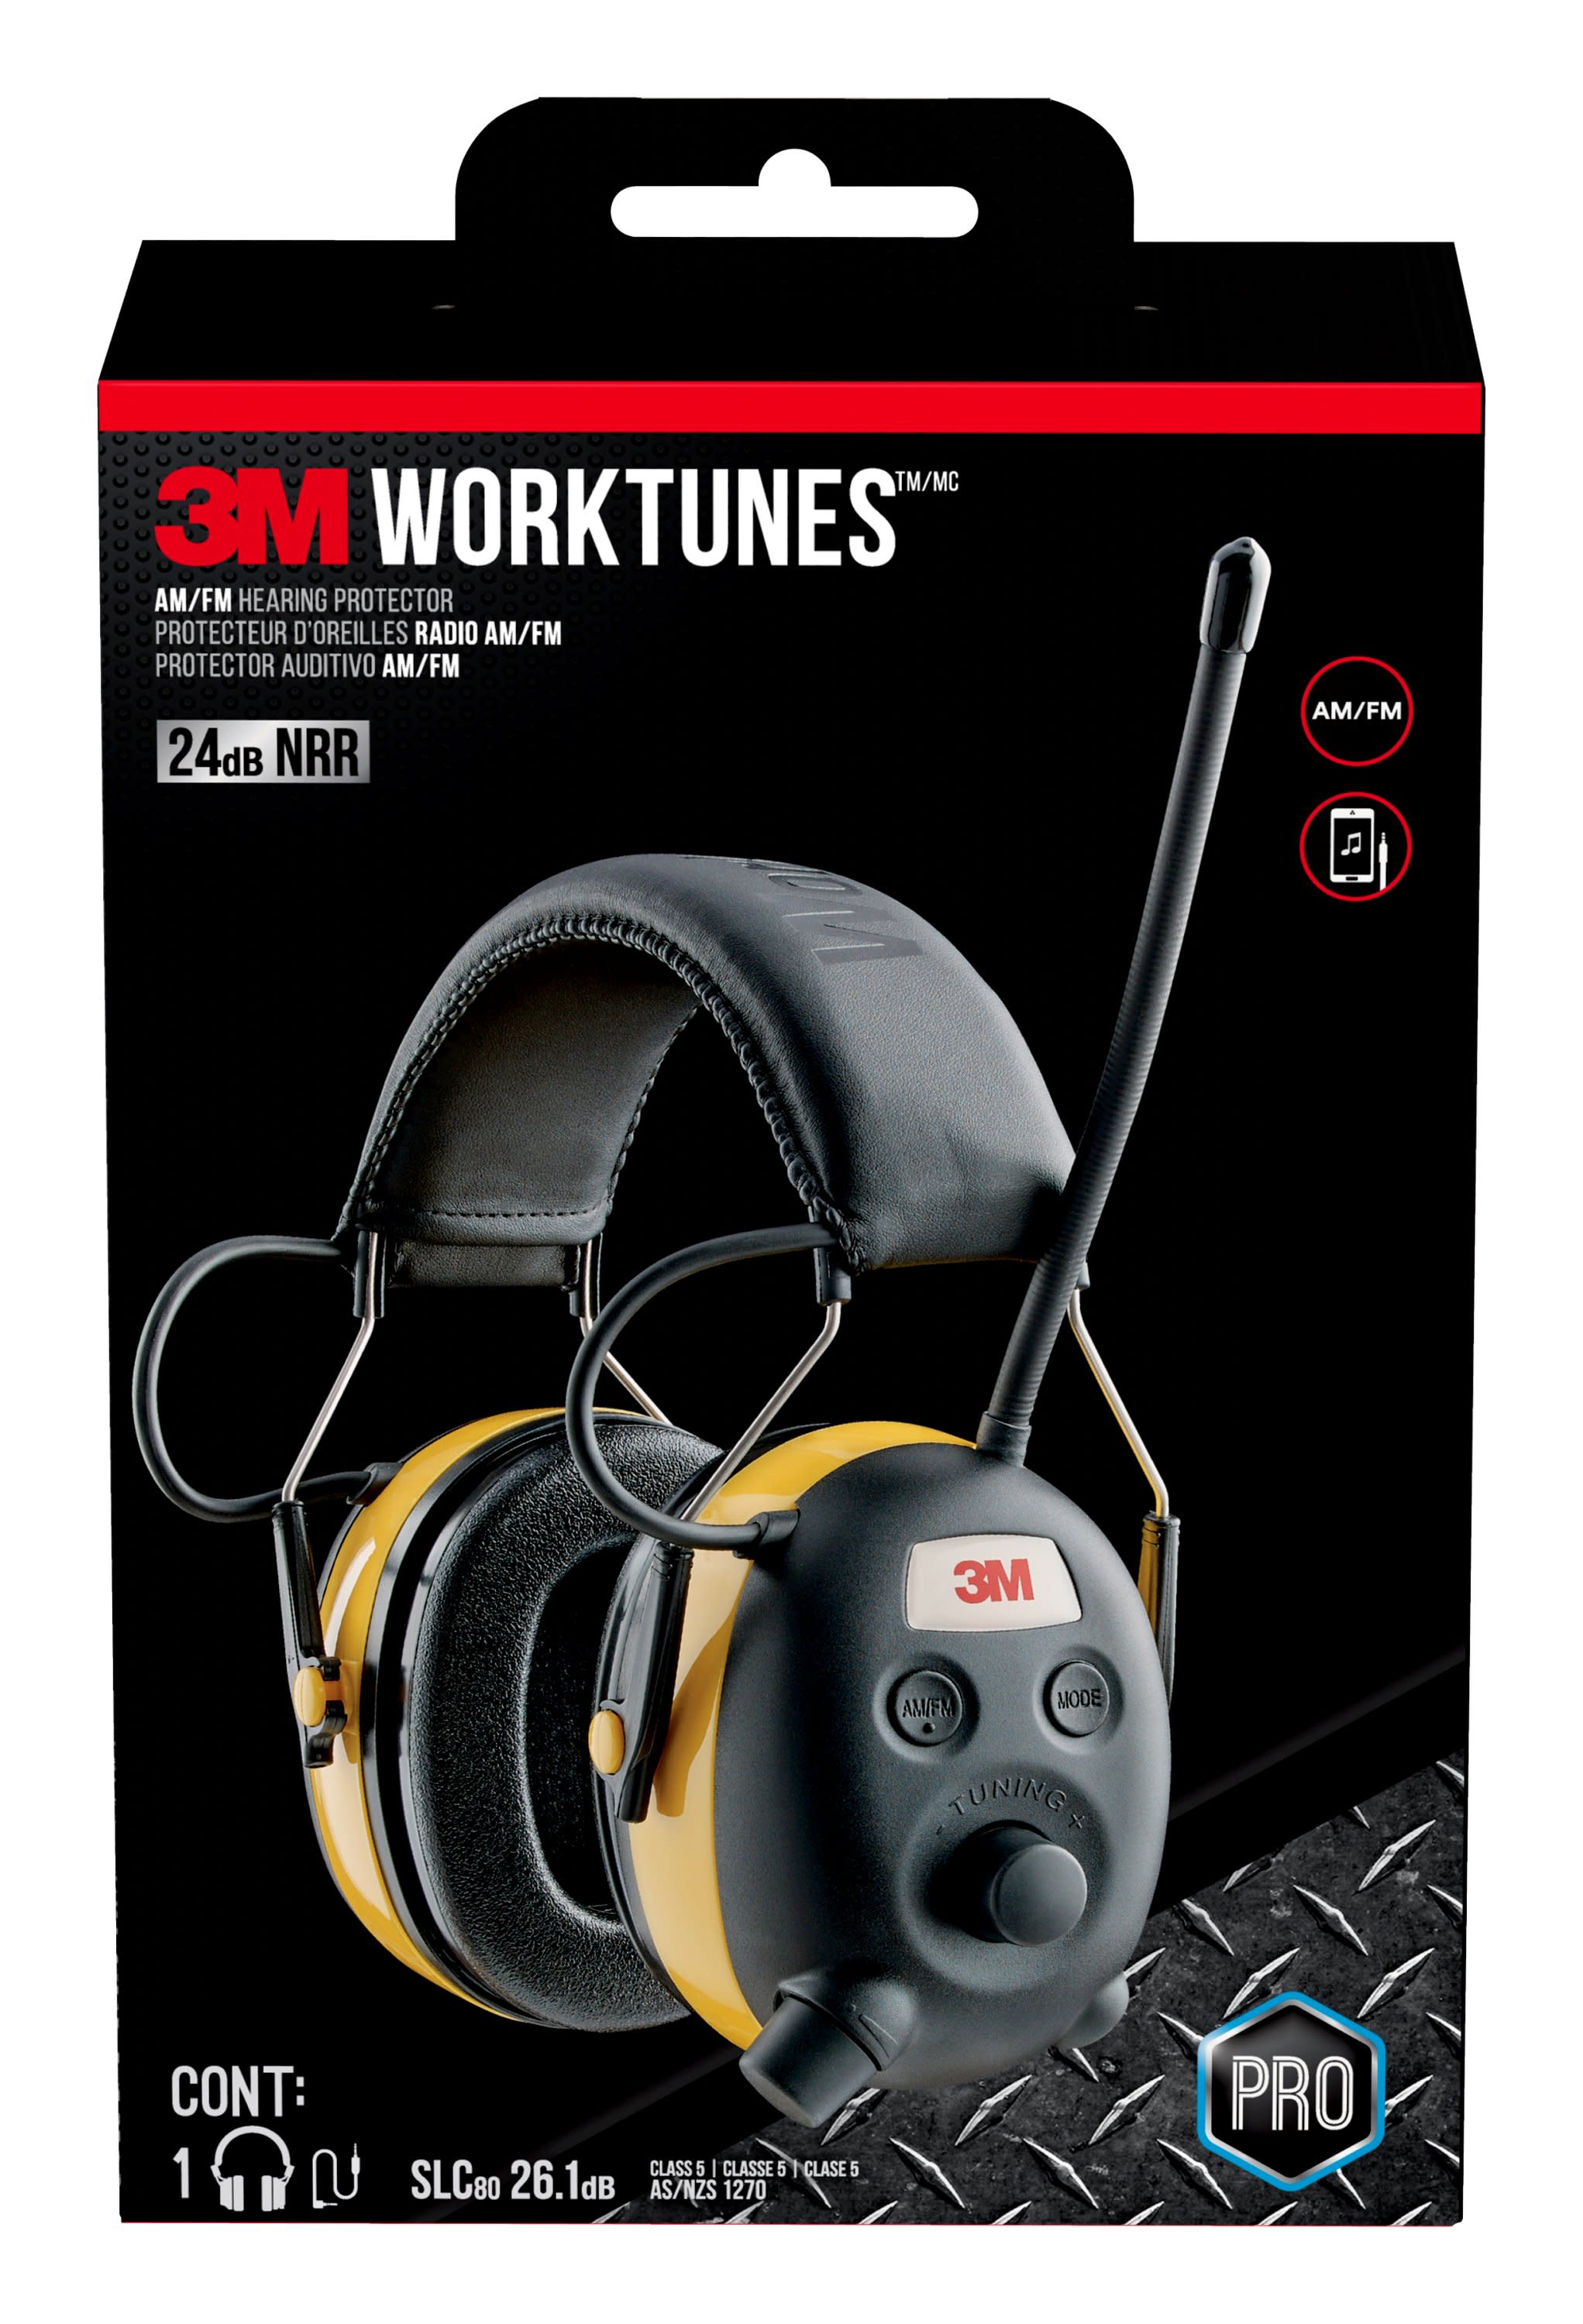 3M WorkTunes Hearing Protector with AM/FM Digital Radio - image 1 of 18